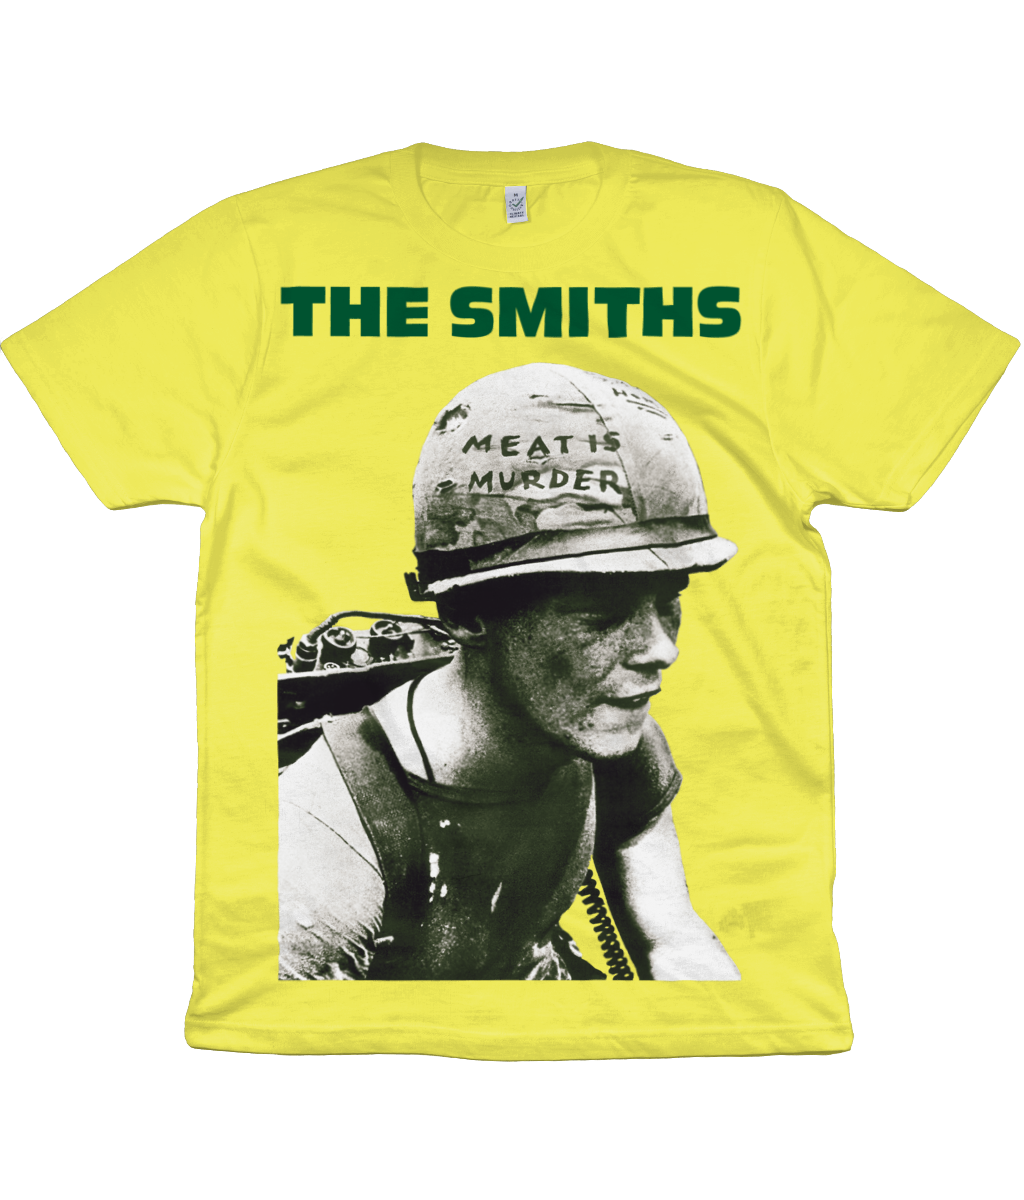 THE SMITHS - MEAT IS MURDER - Green Text - Version 2